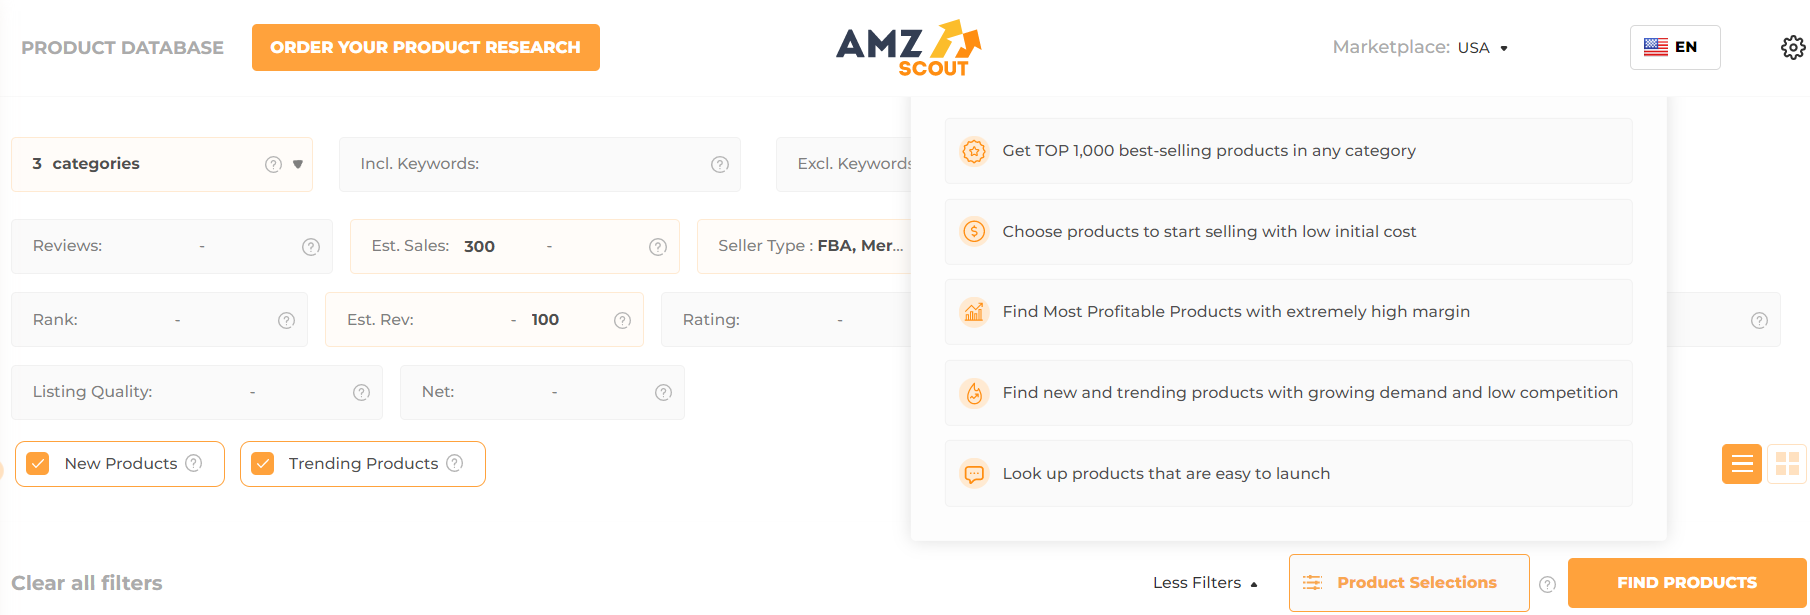 How to use AMZScout Product Database for product research